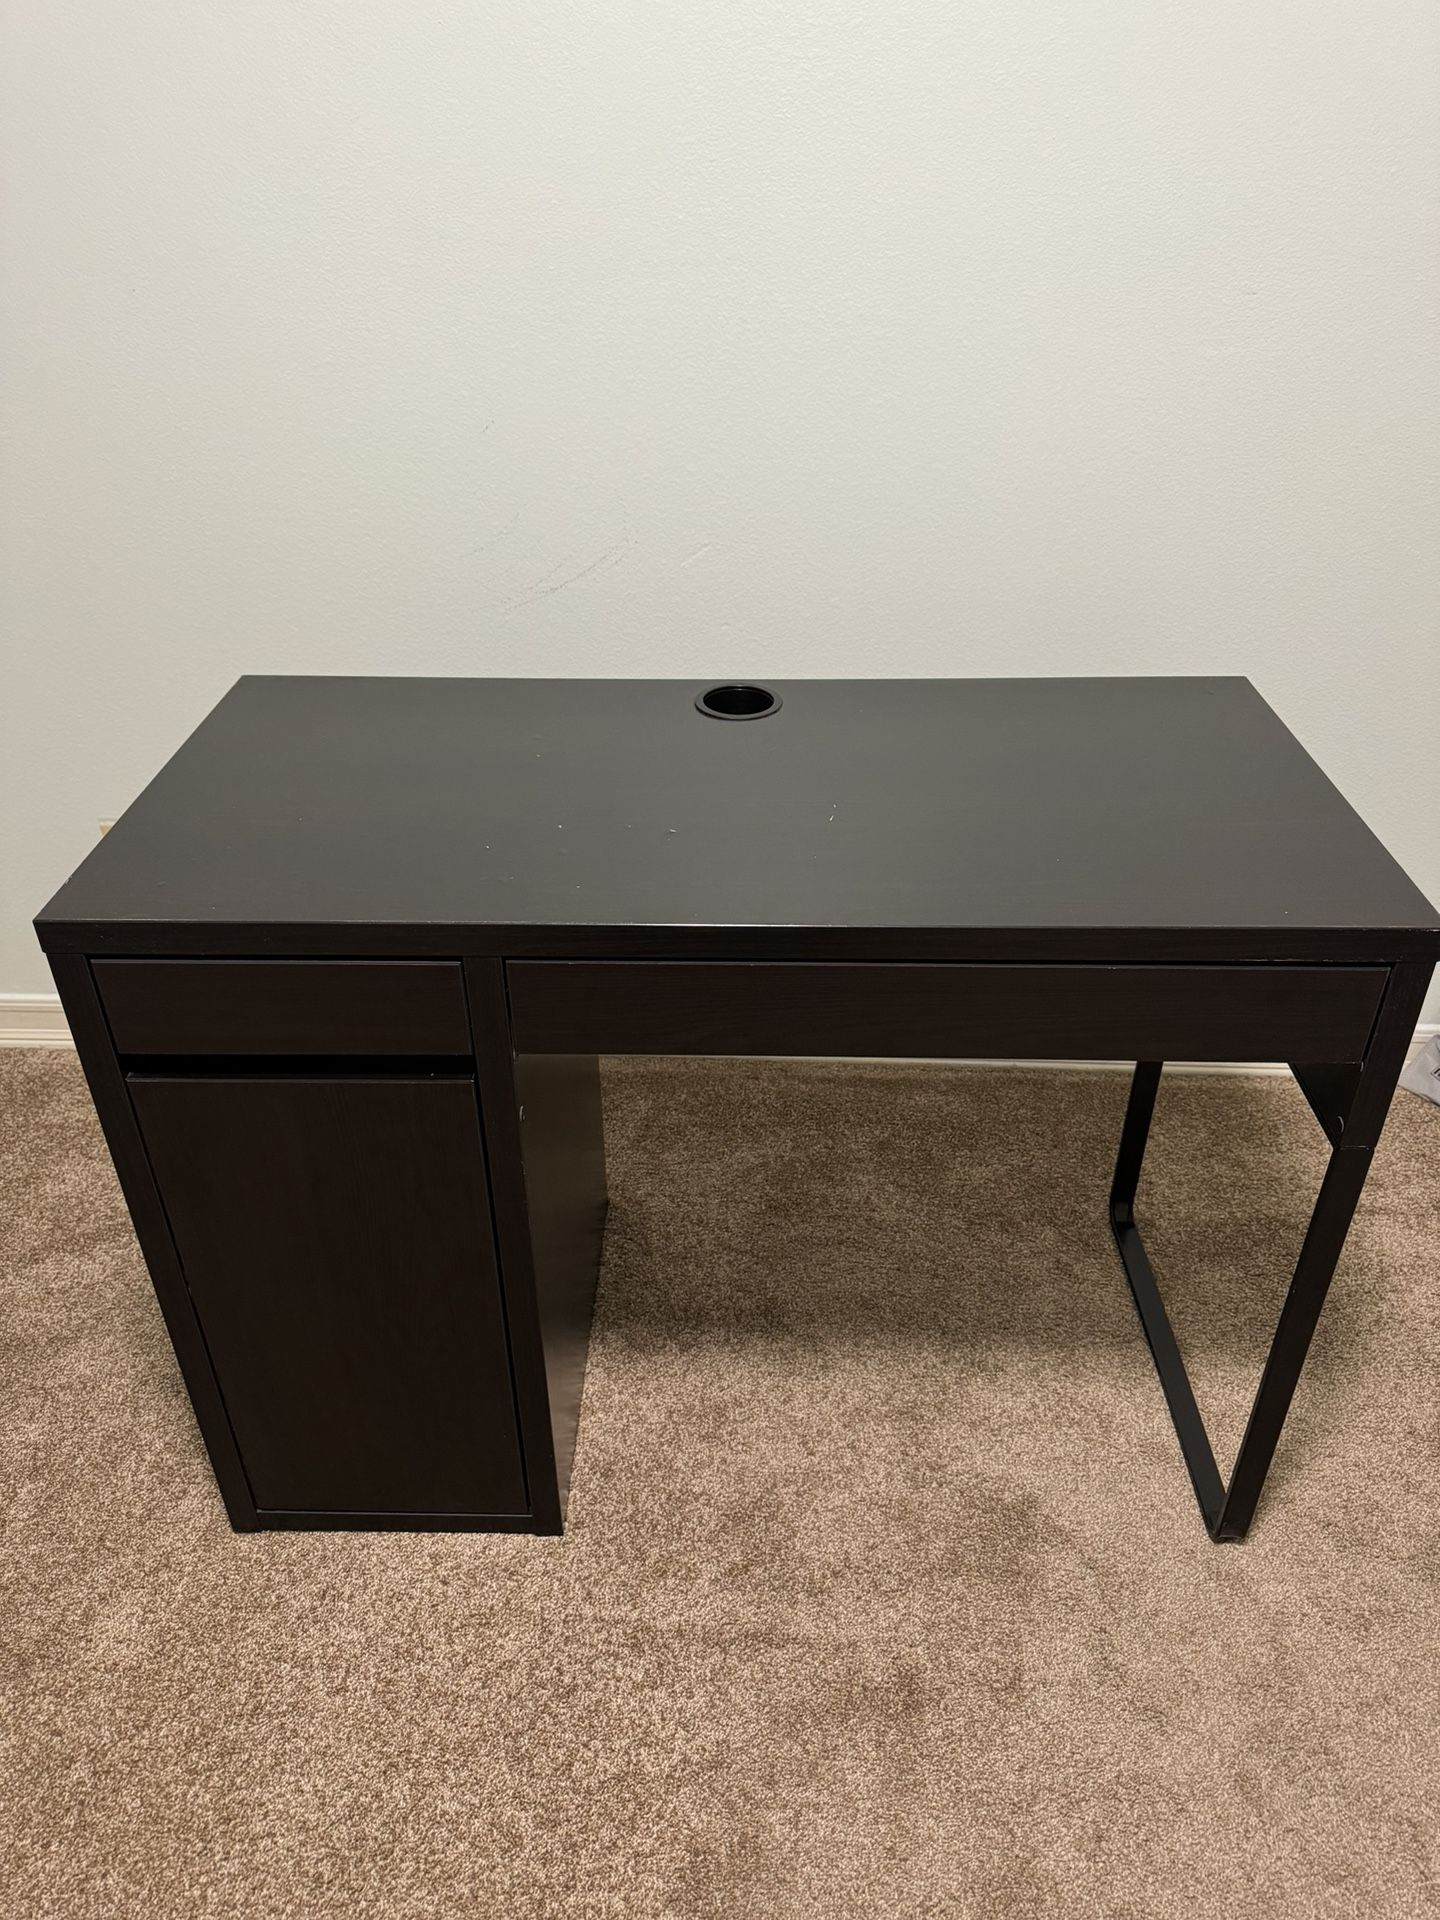 Ikea Micke Desk *Still Available If ad Is Up*